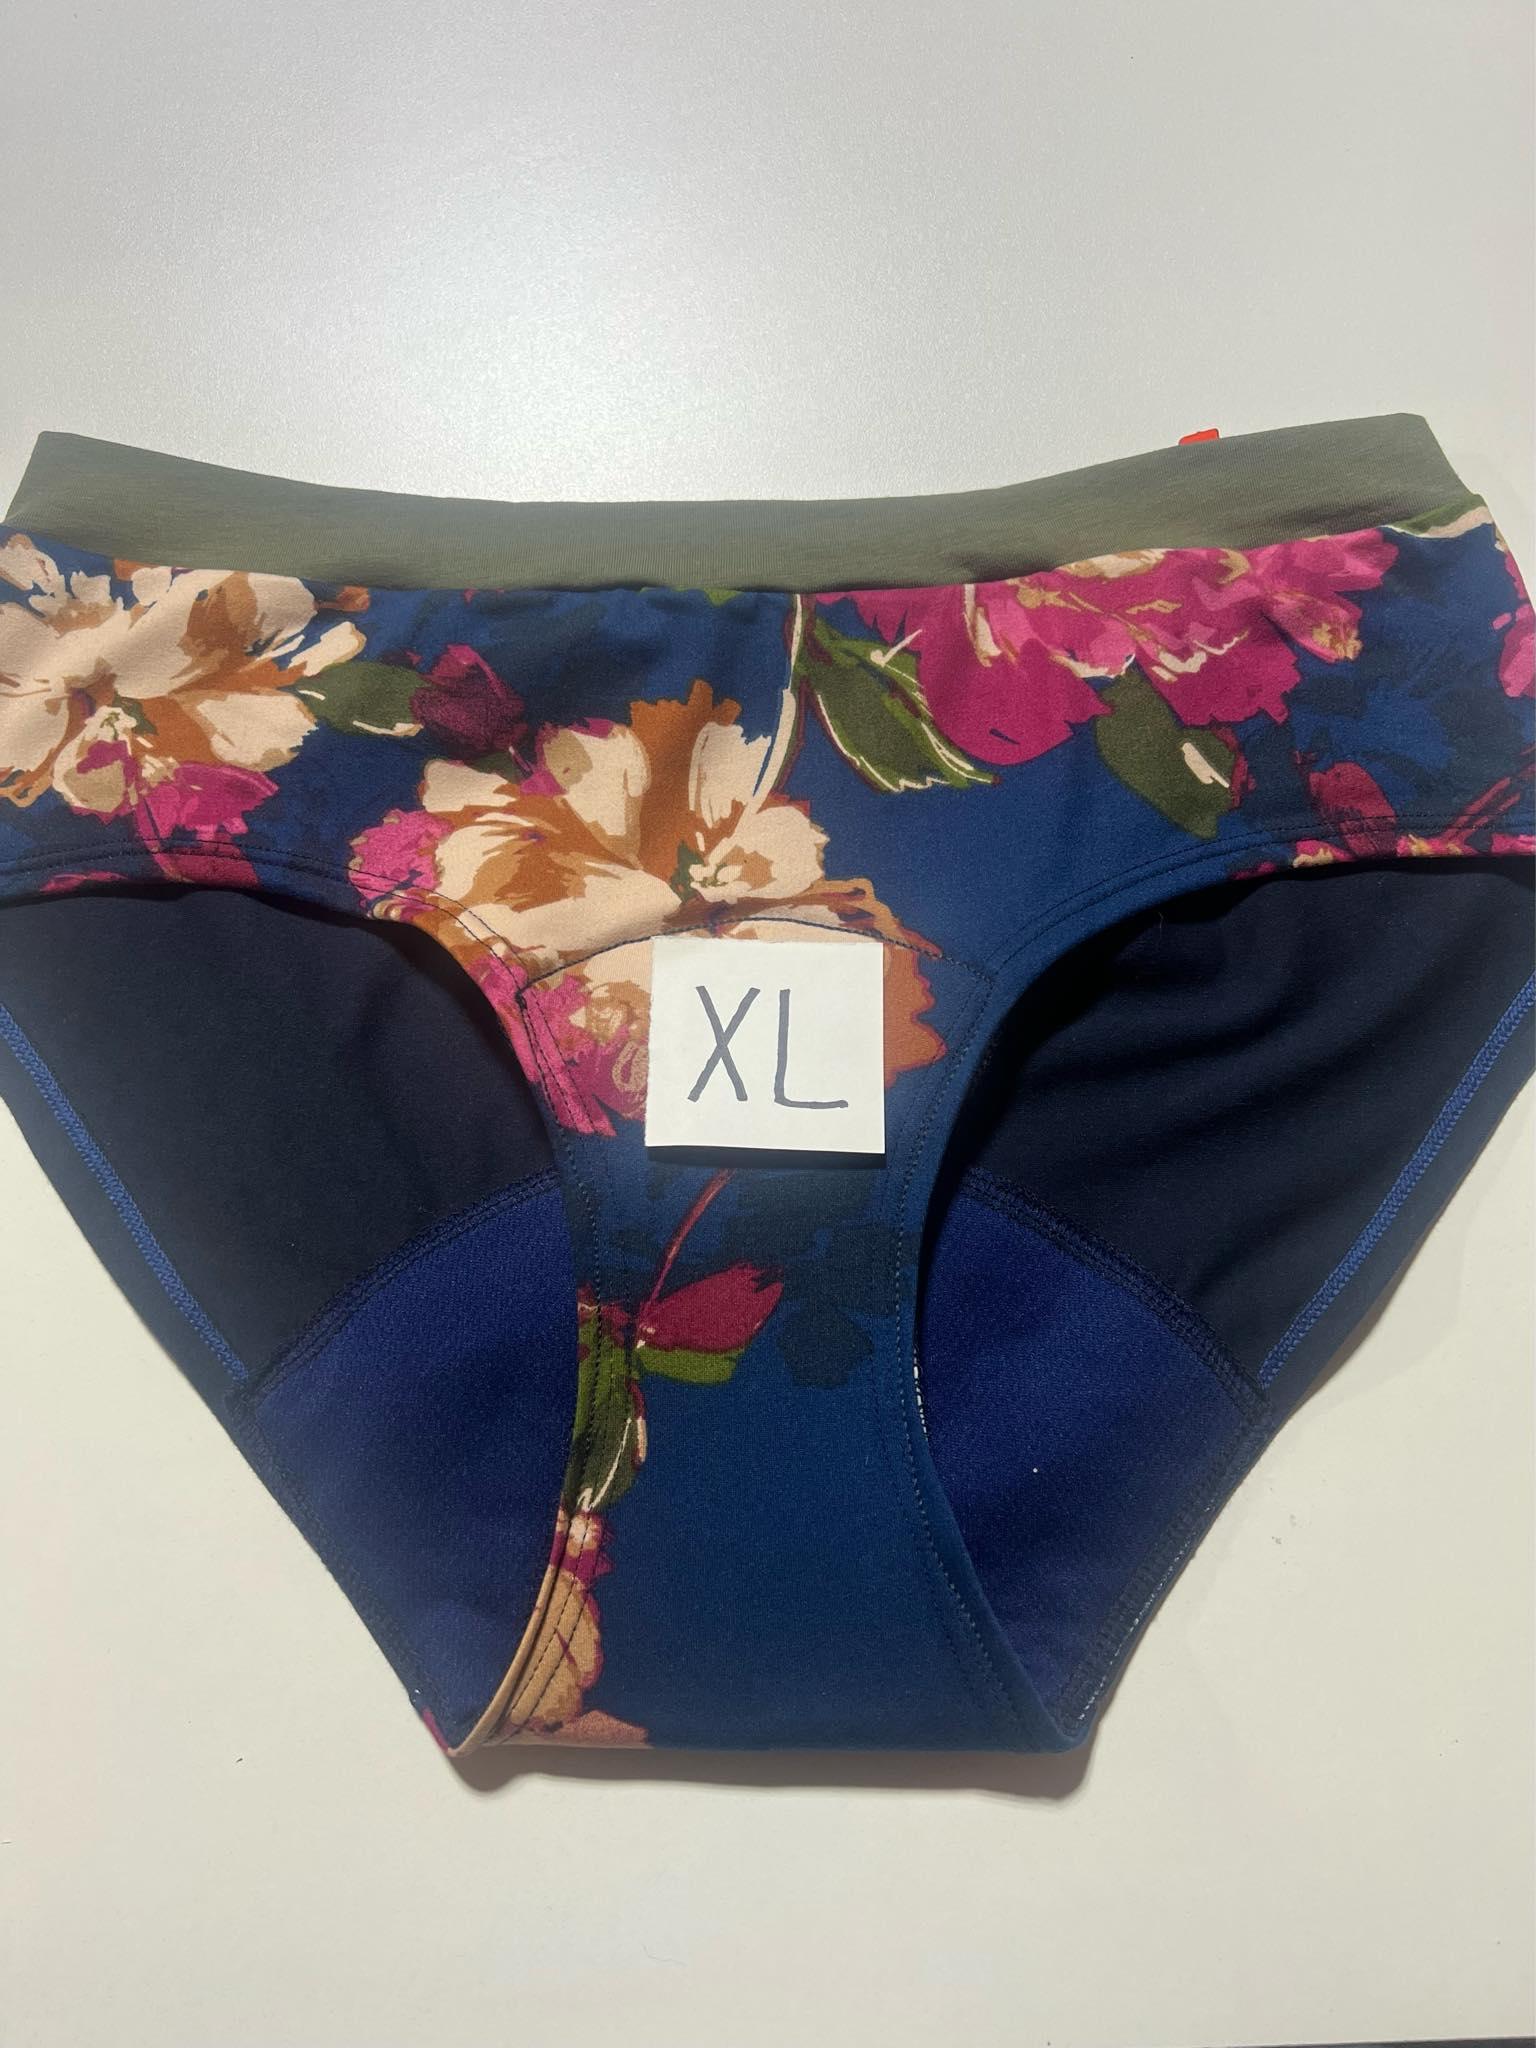 R.A. Confections  Classic period panties with built-in protection